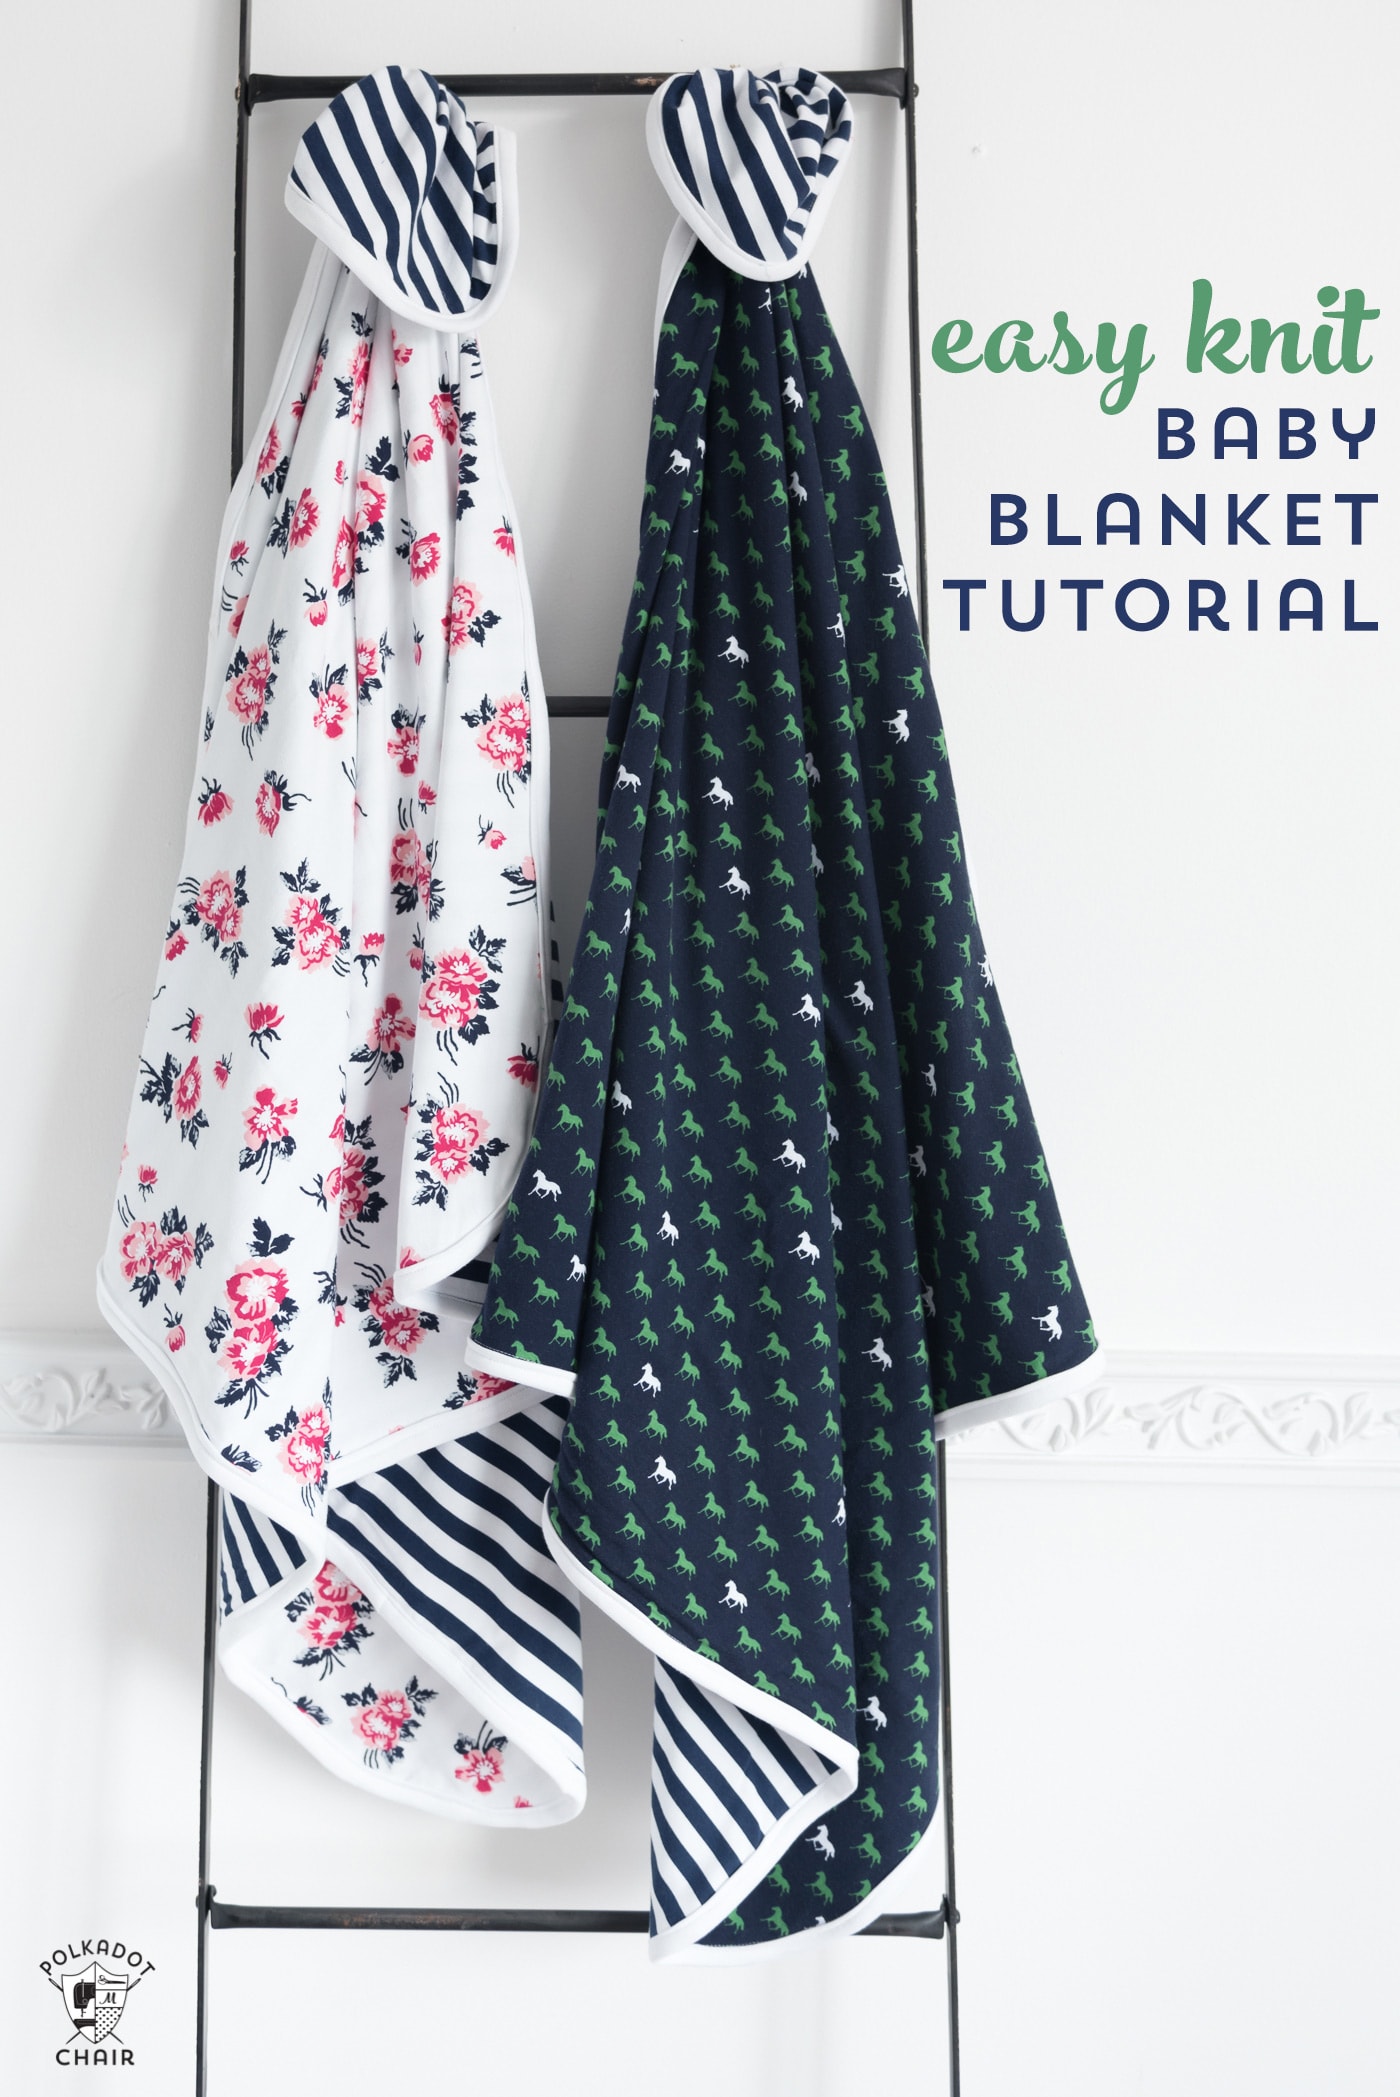 How to Sew Blanket Binding on a Flannel Baby Blanket Tutorial  Sewing  projects for beginners, Satin blanket binding tutorial, Beginner sewing  projects easy